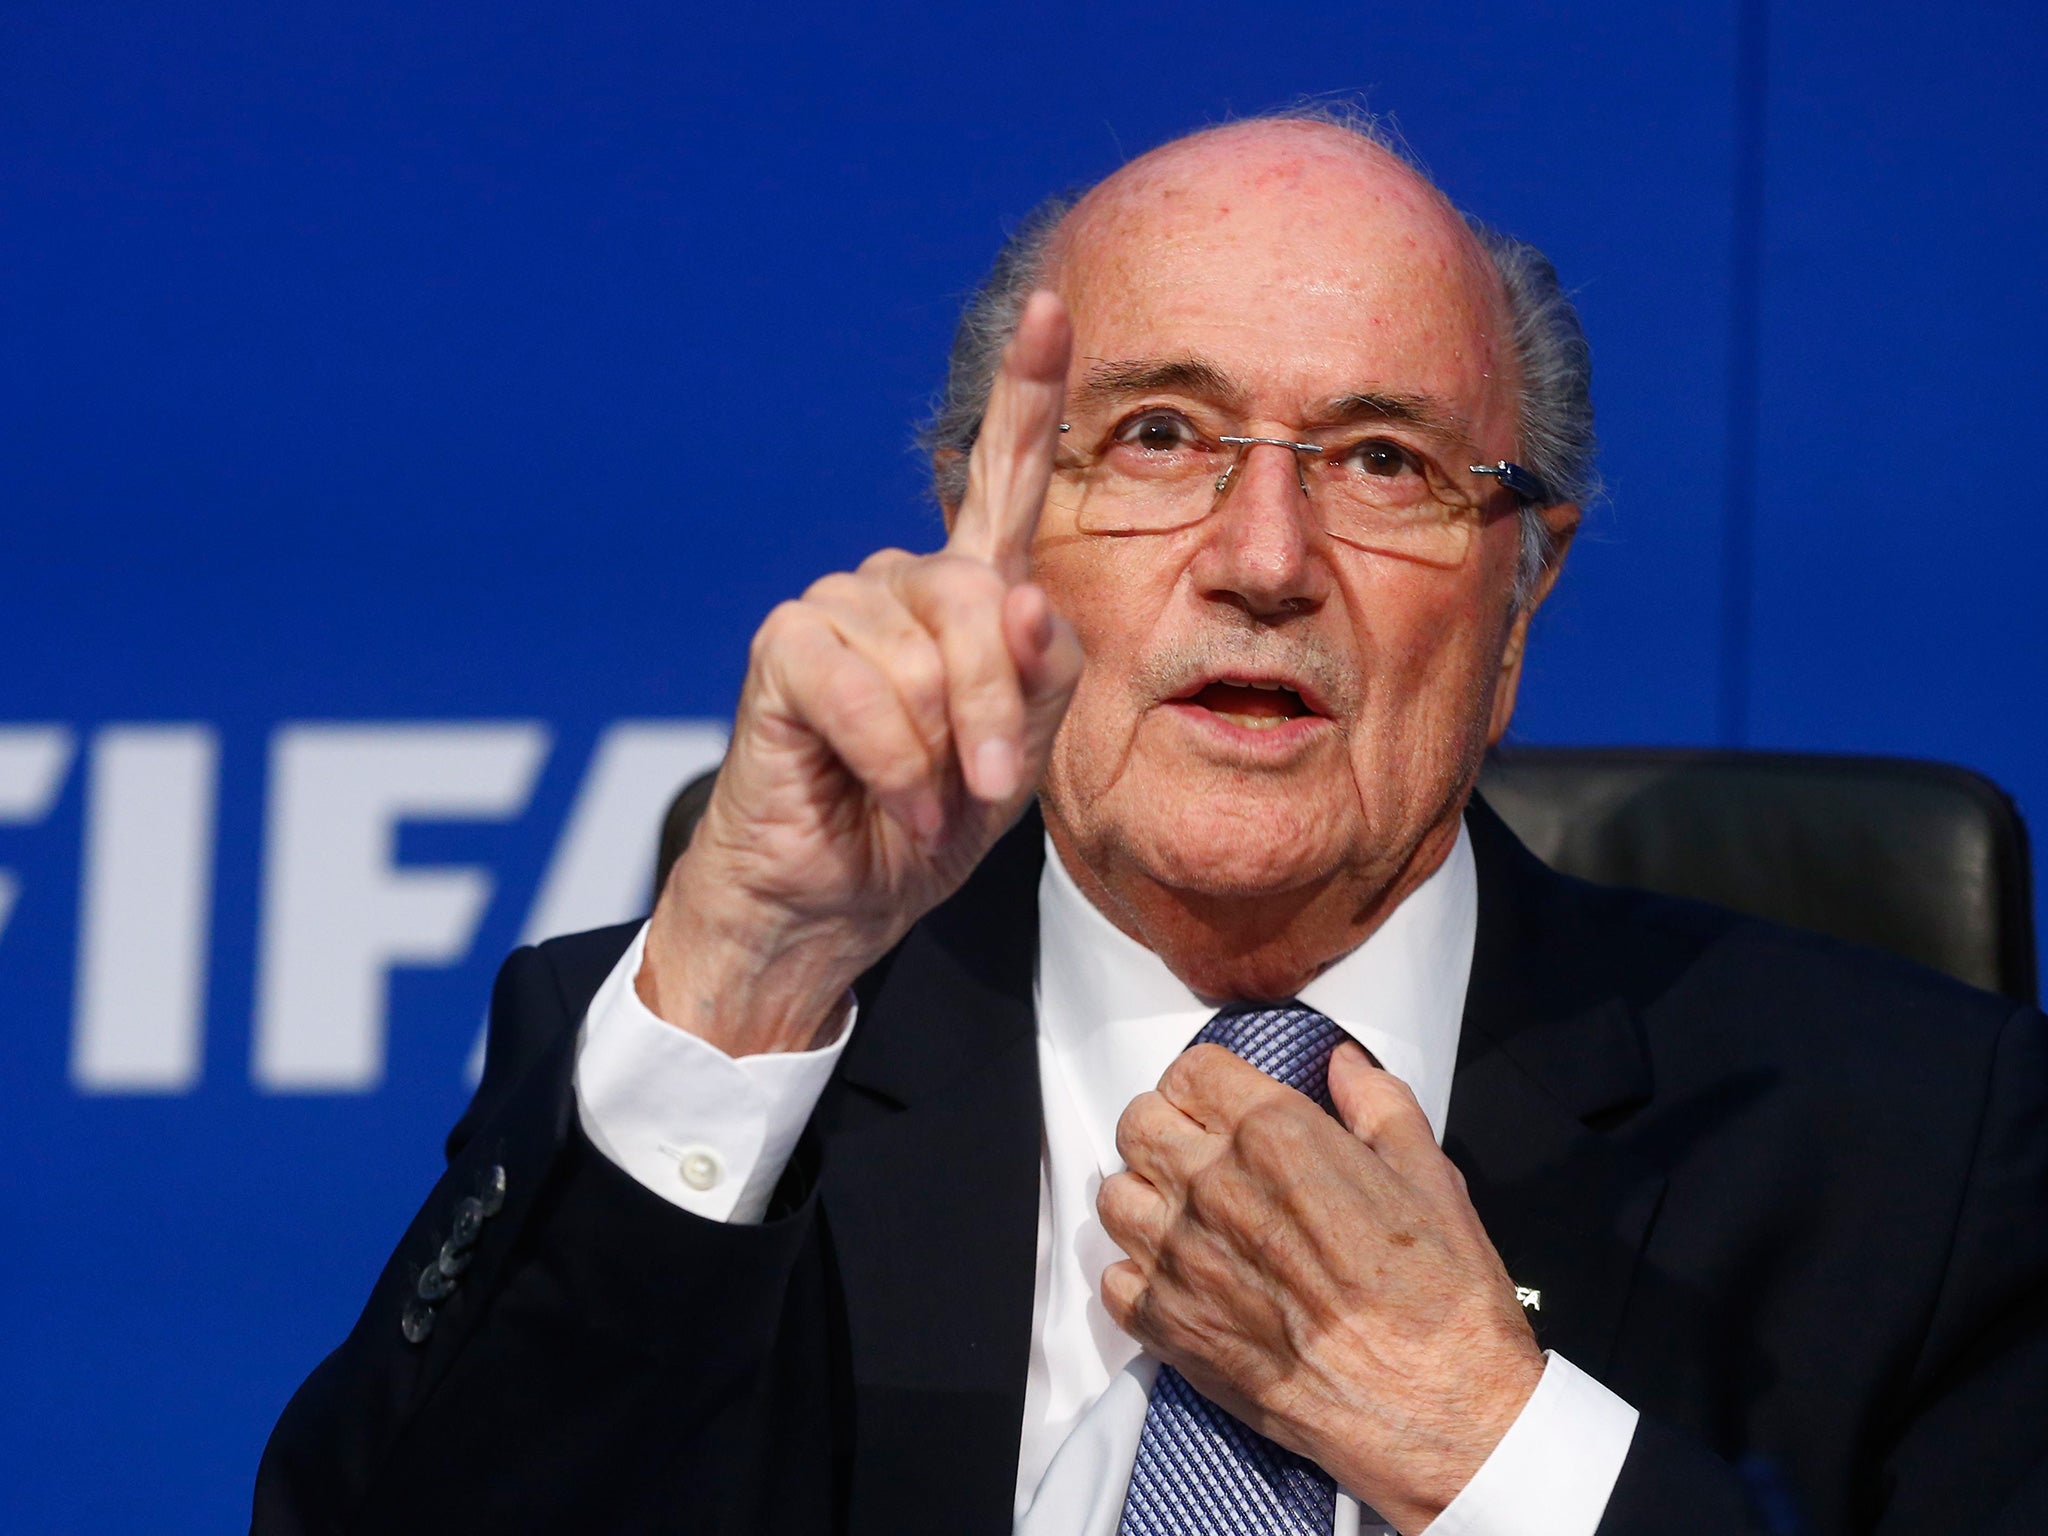 Sepp Blatter says he will appeal against Fifa’s decision